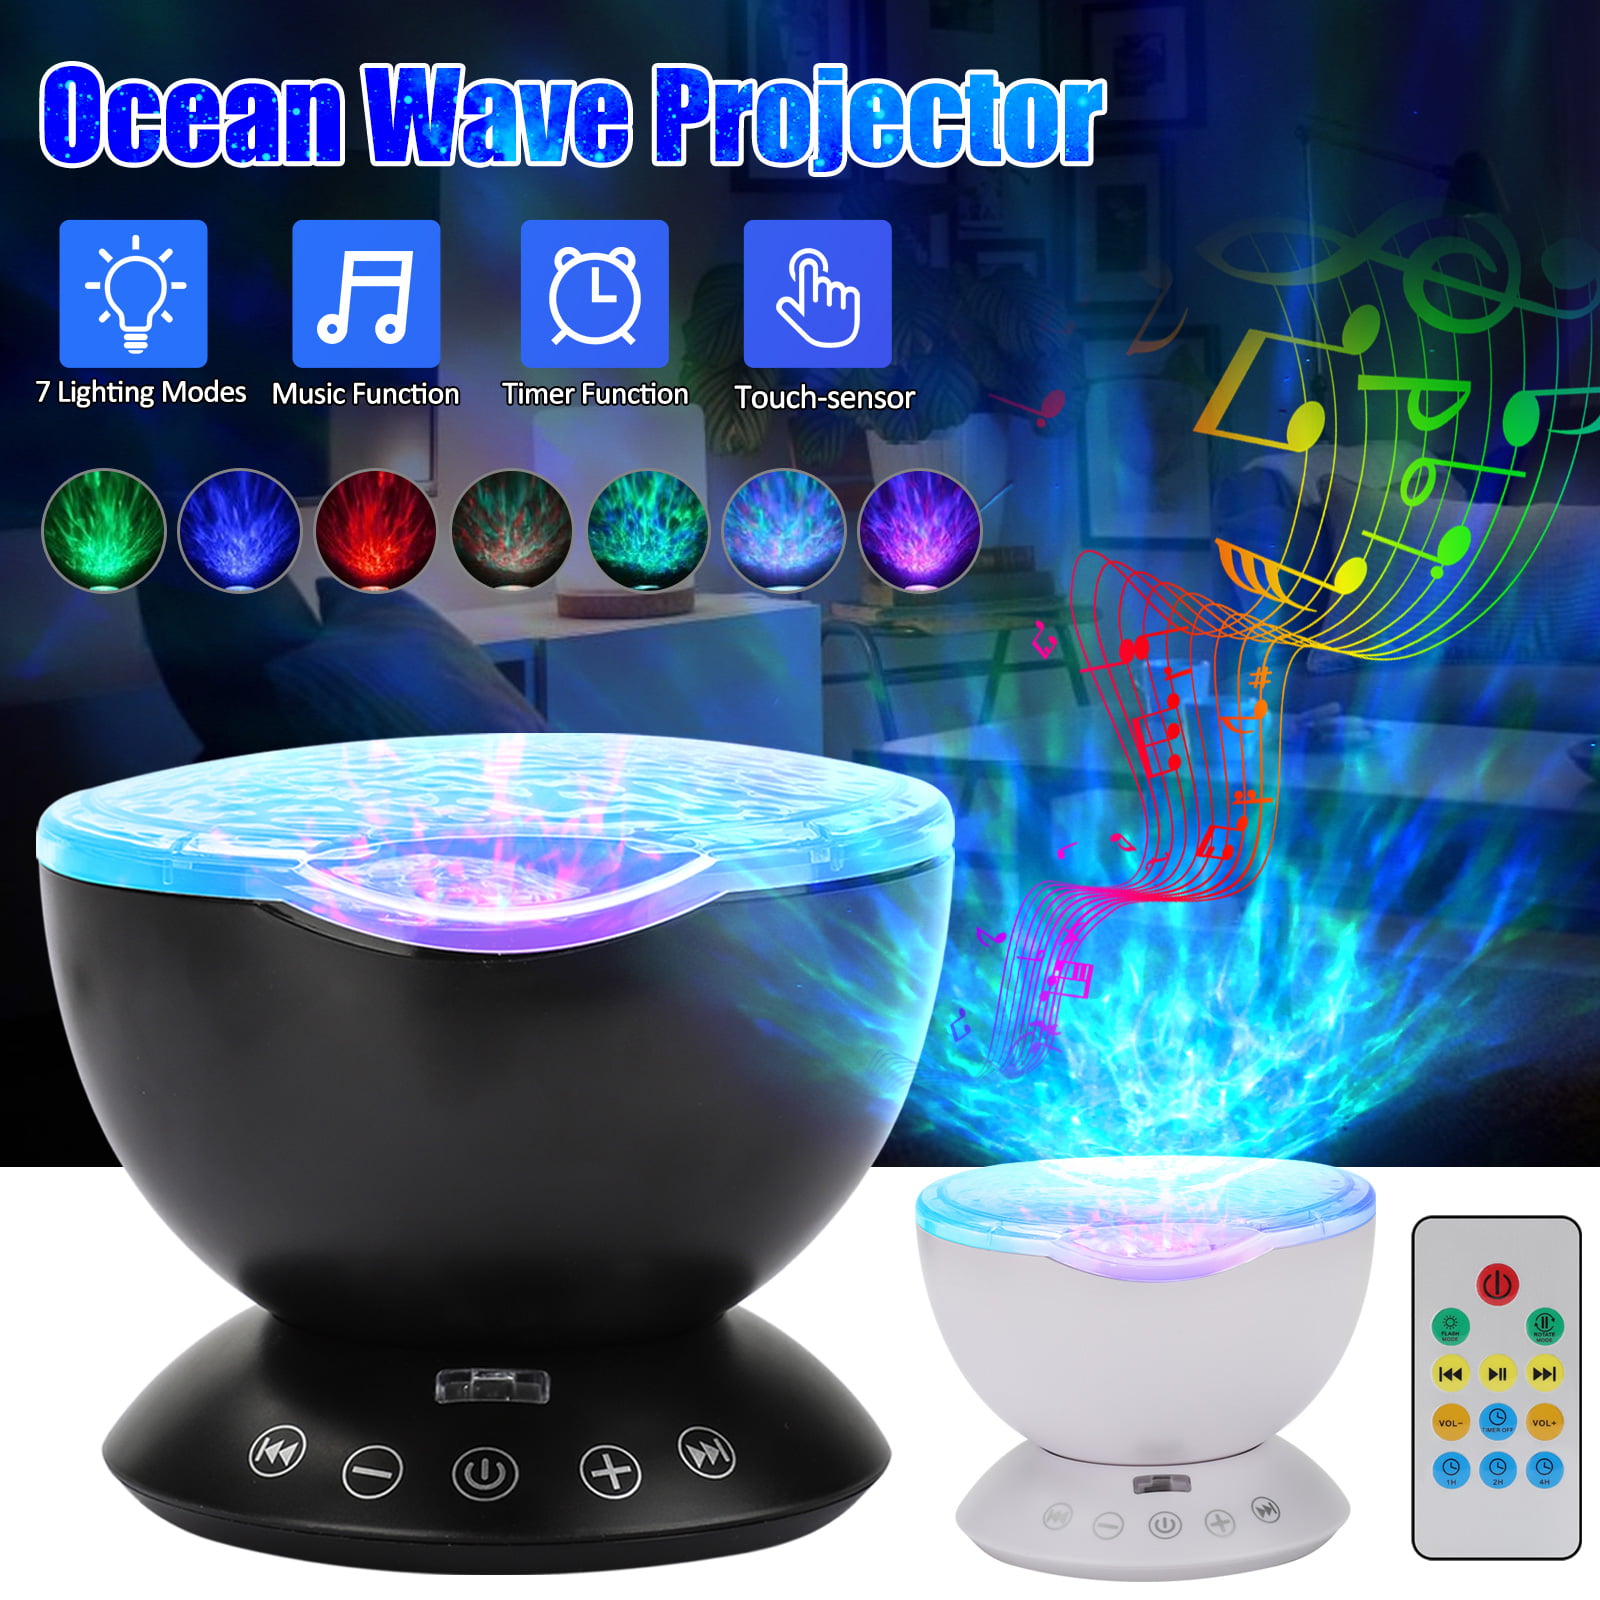 Remote Control Night Light Ocean Wave Projector, 12 LED